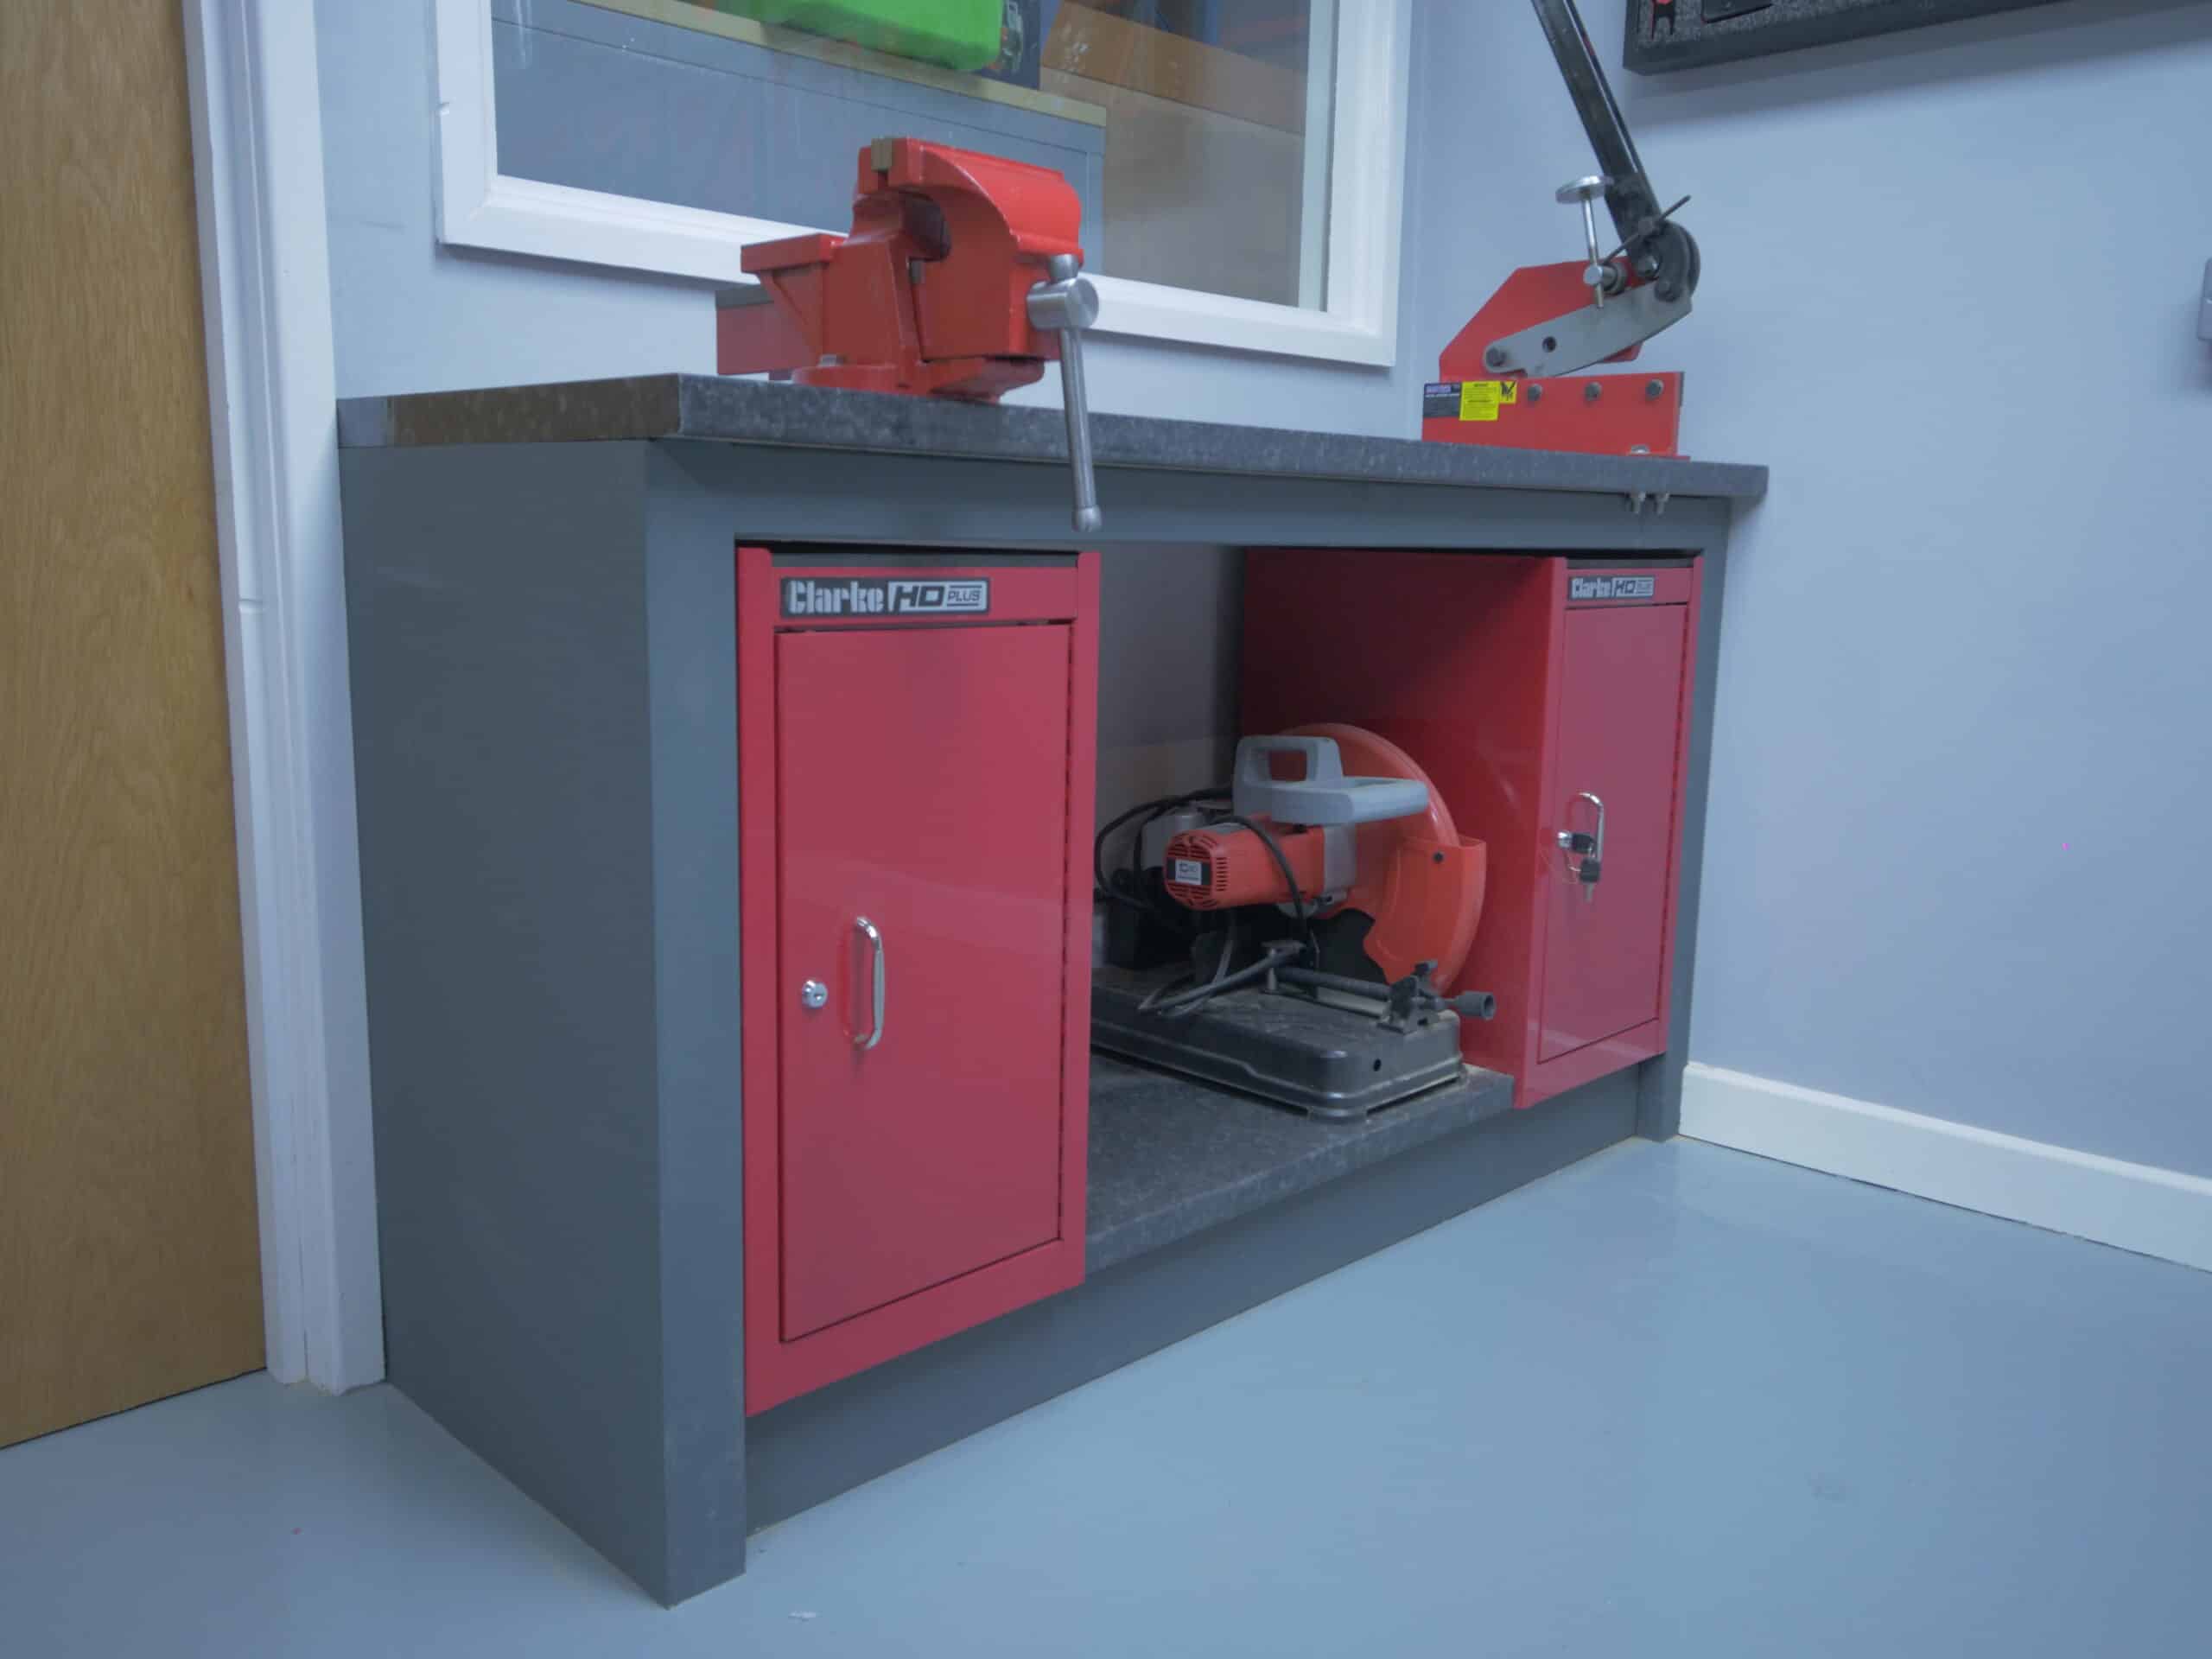 If your workshop goals include a homemade workbench, then check out how we made this for less than £150